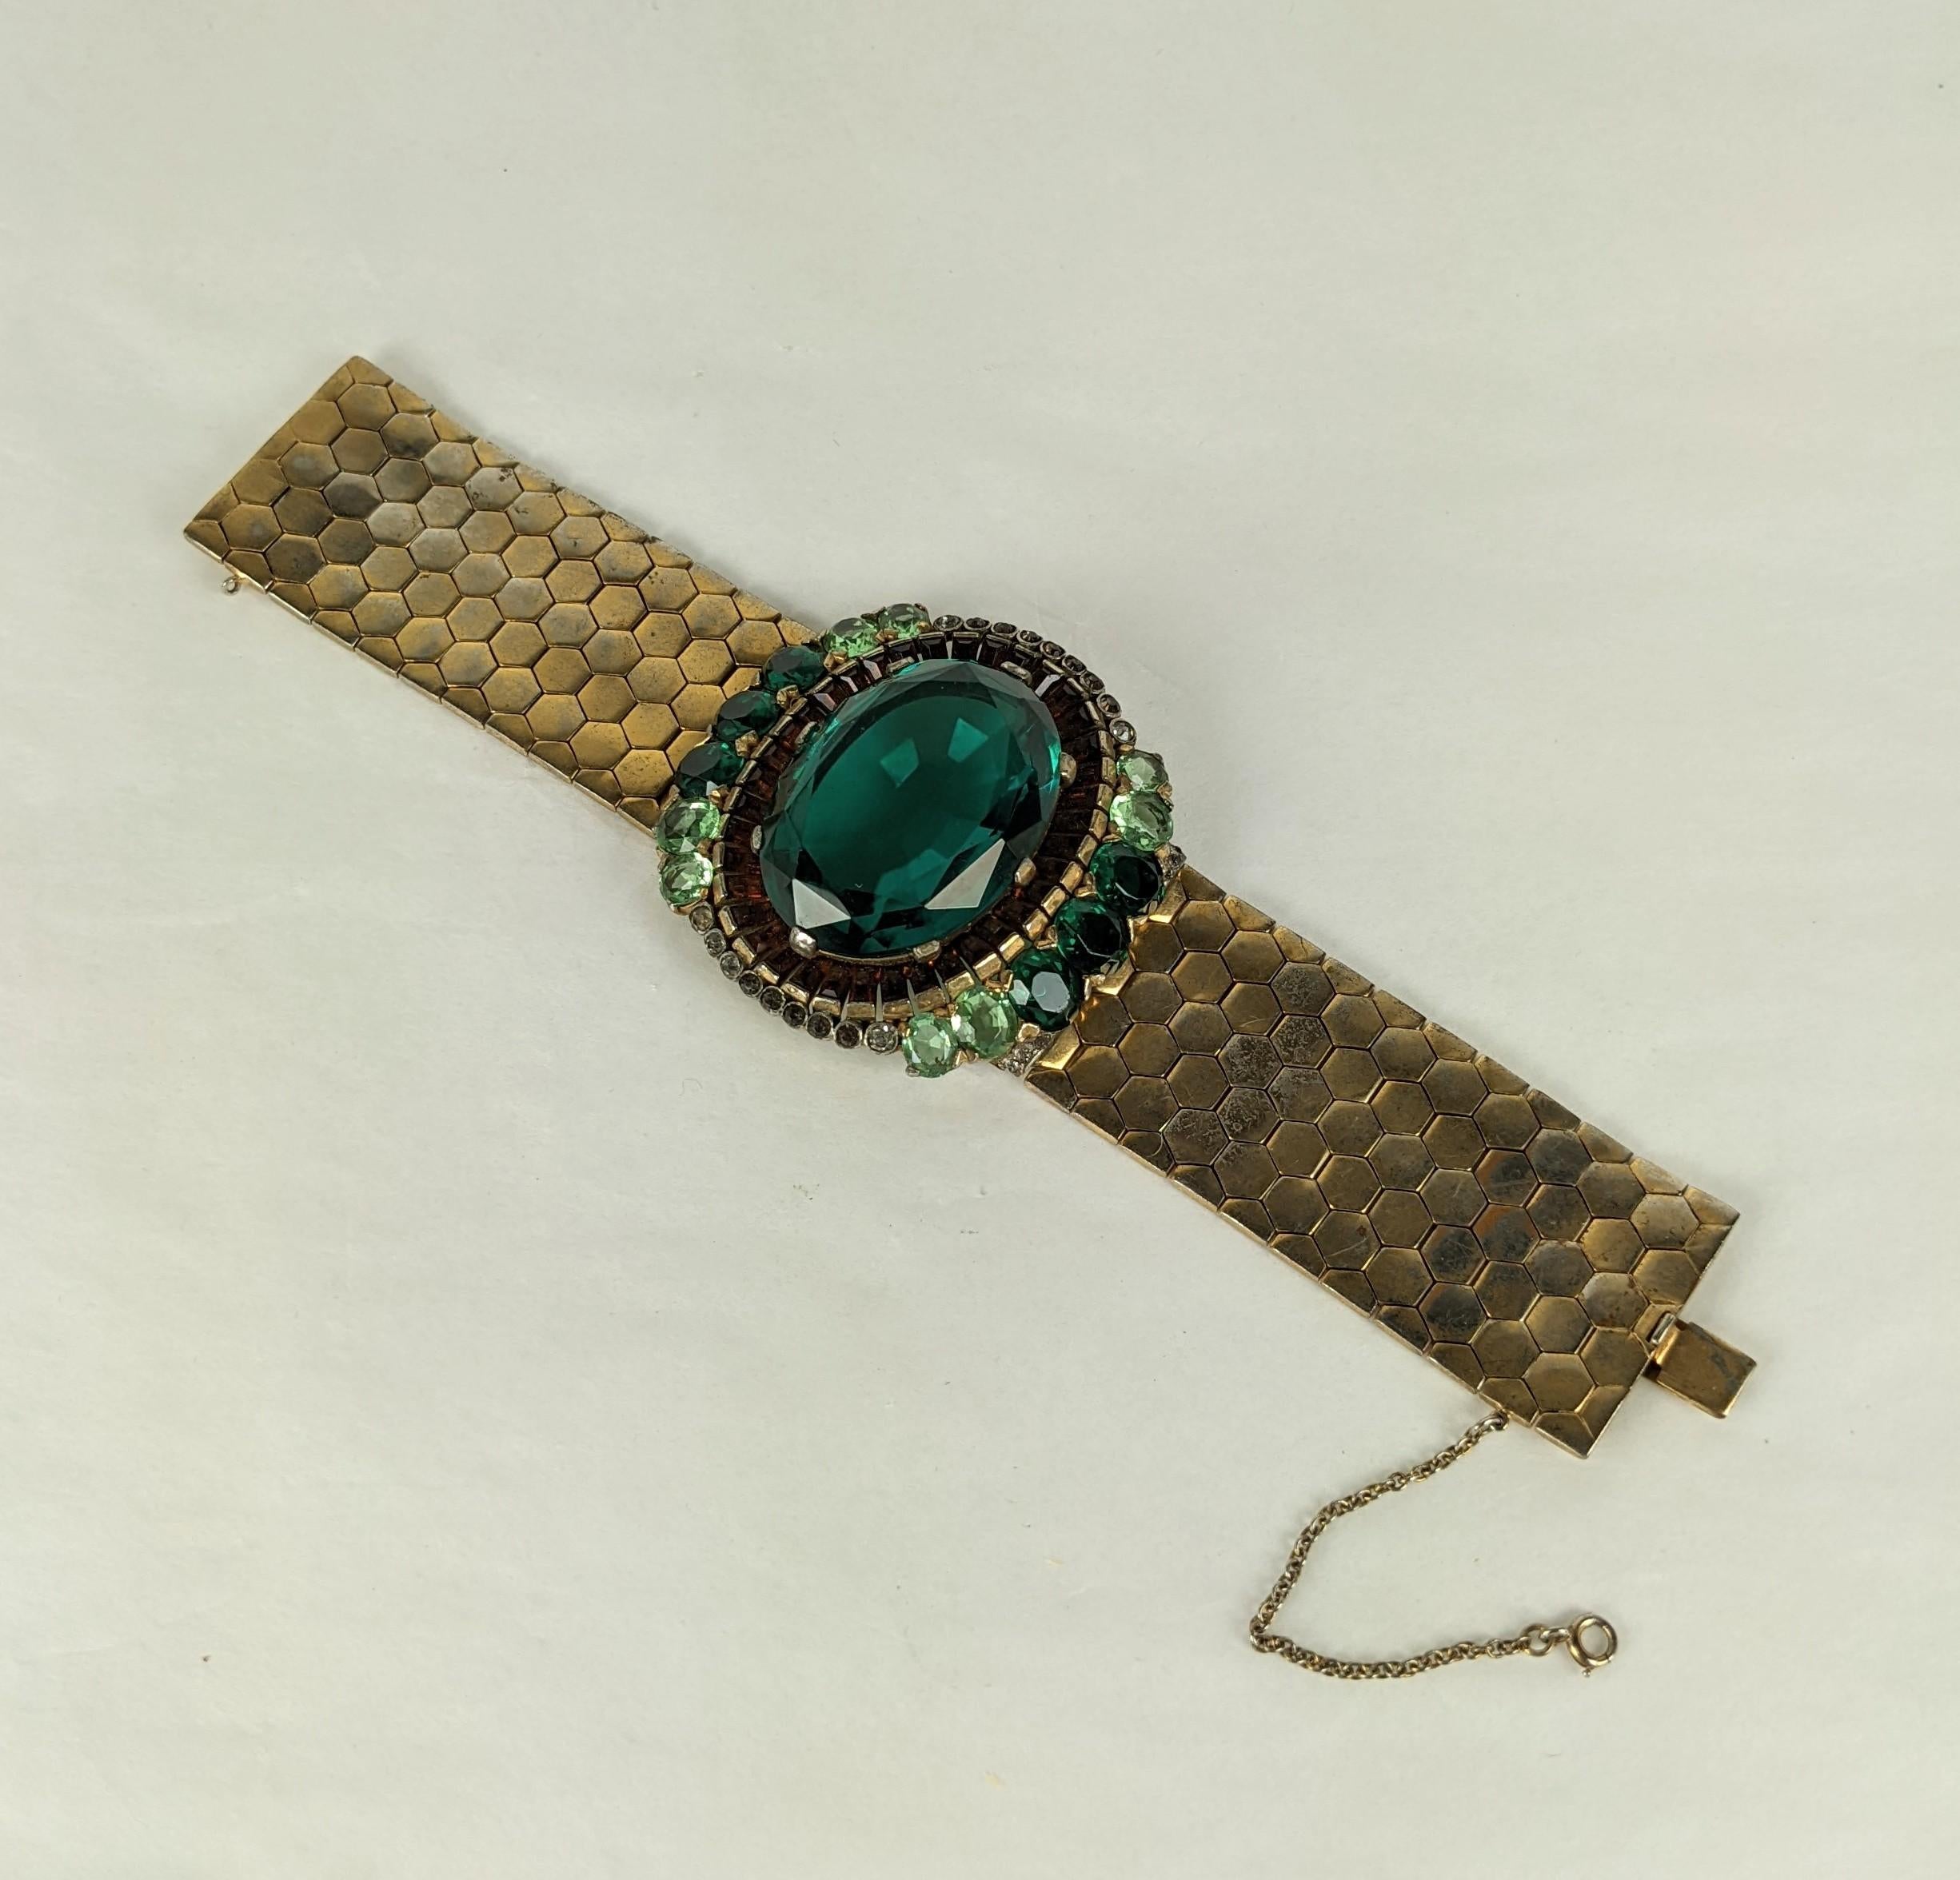 Important Alfred Phillipe Trifari Rare Retro Bracelet from the late 1930's. Oval pastes in emerald and peridot surround a large faux emerald surrounded by topaz baguettes. This central motif is set on a substantial gilt flexible track band. Signed